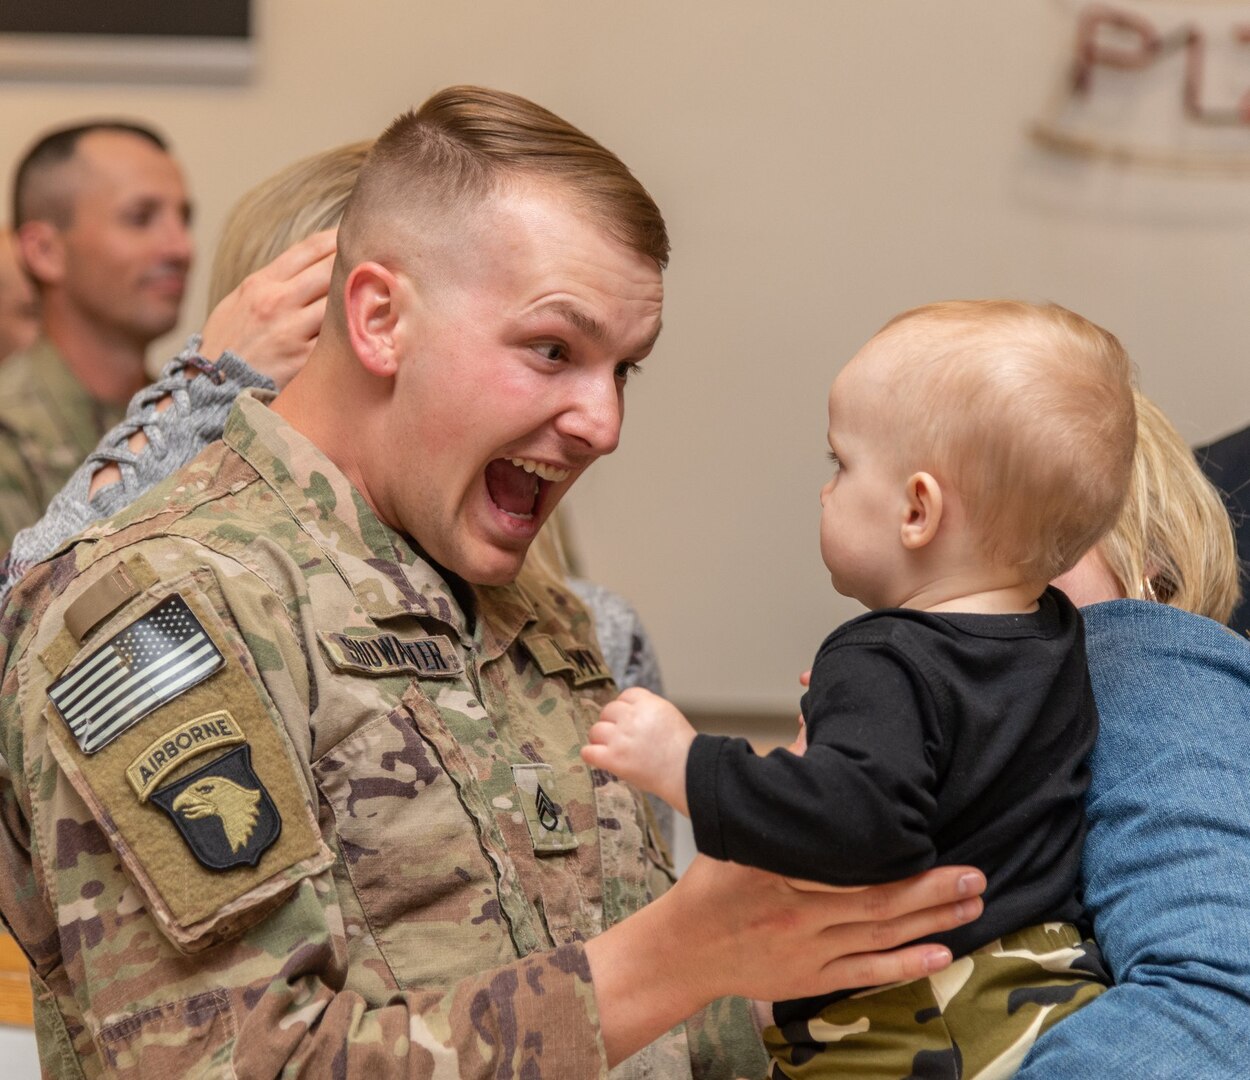 U.S. Army Staff Sgt. Corey Showalter of the 156th Military Police Law and Order Detachment greets his child after returning to Charleston, West Virginia Oct. 10, 2018 following a nine month deployment to Afghanistan. (West Virginia National Guard photo by Bo Wriston)